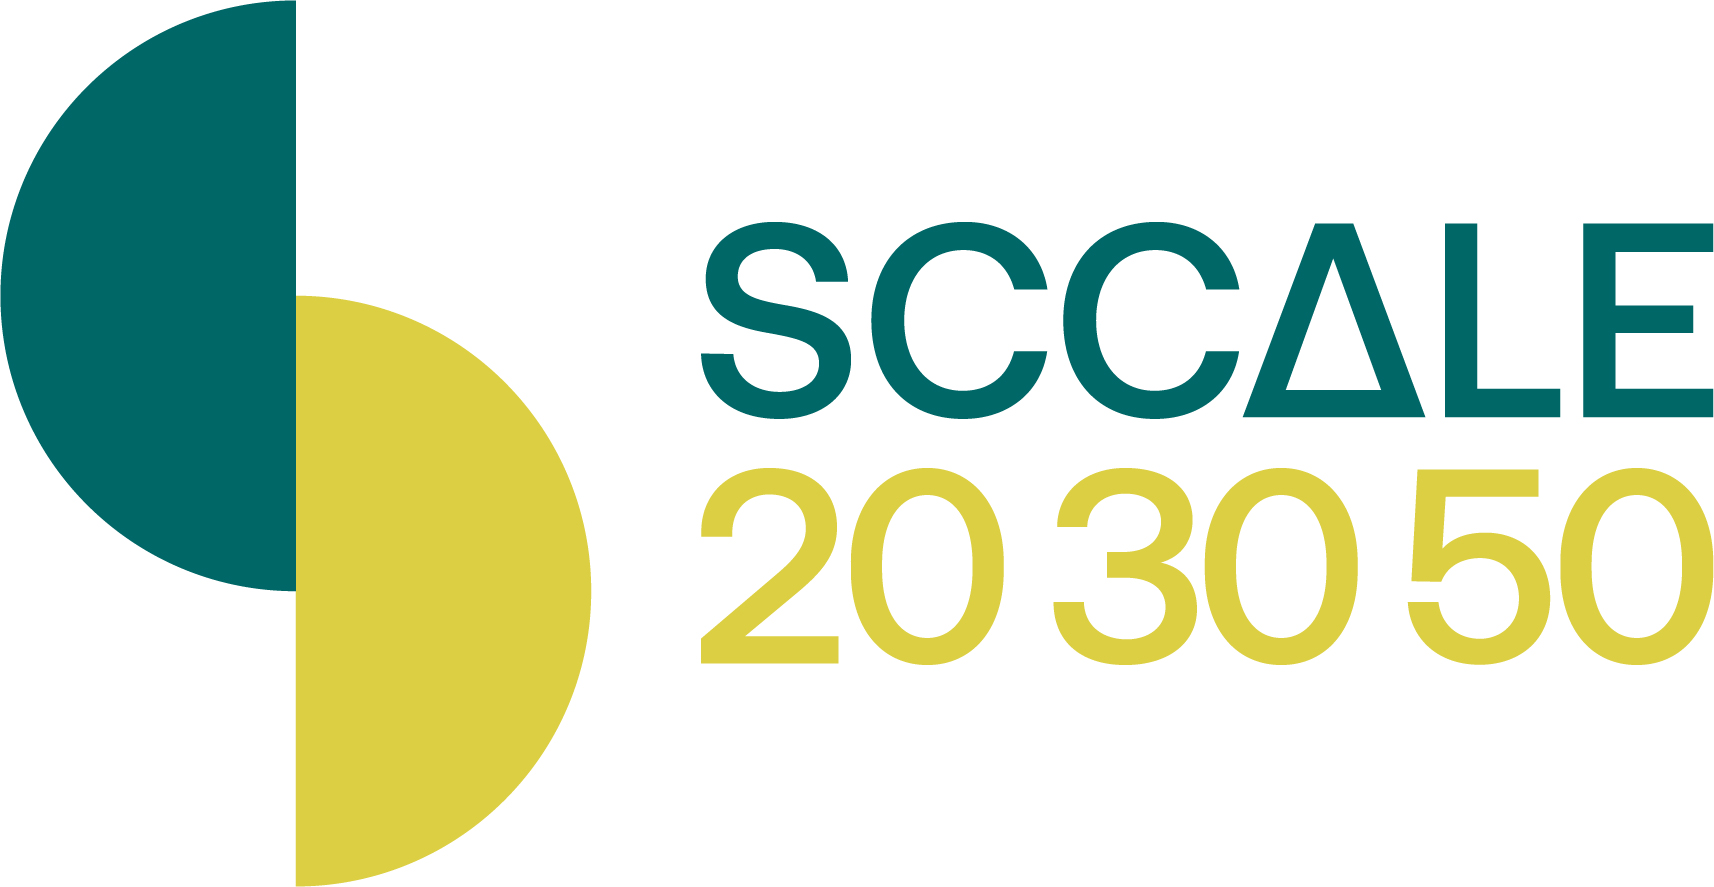 SCCALE  20-30-50